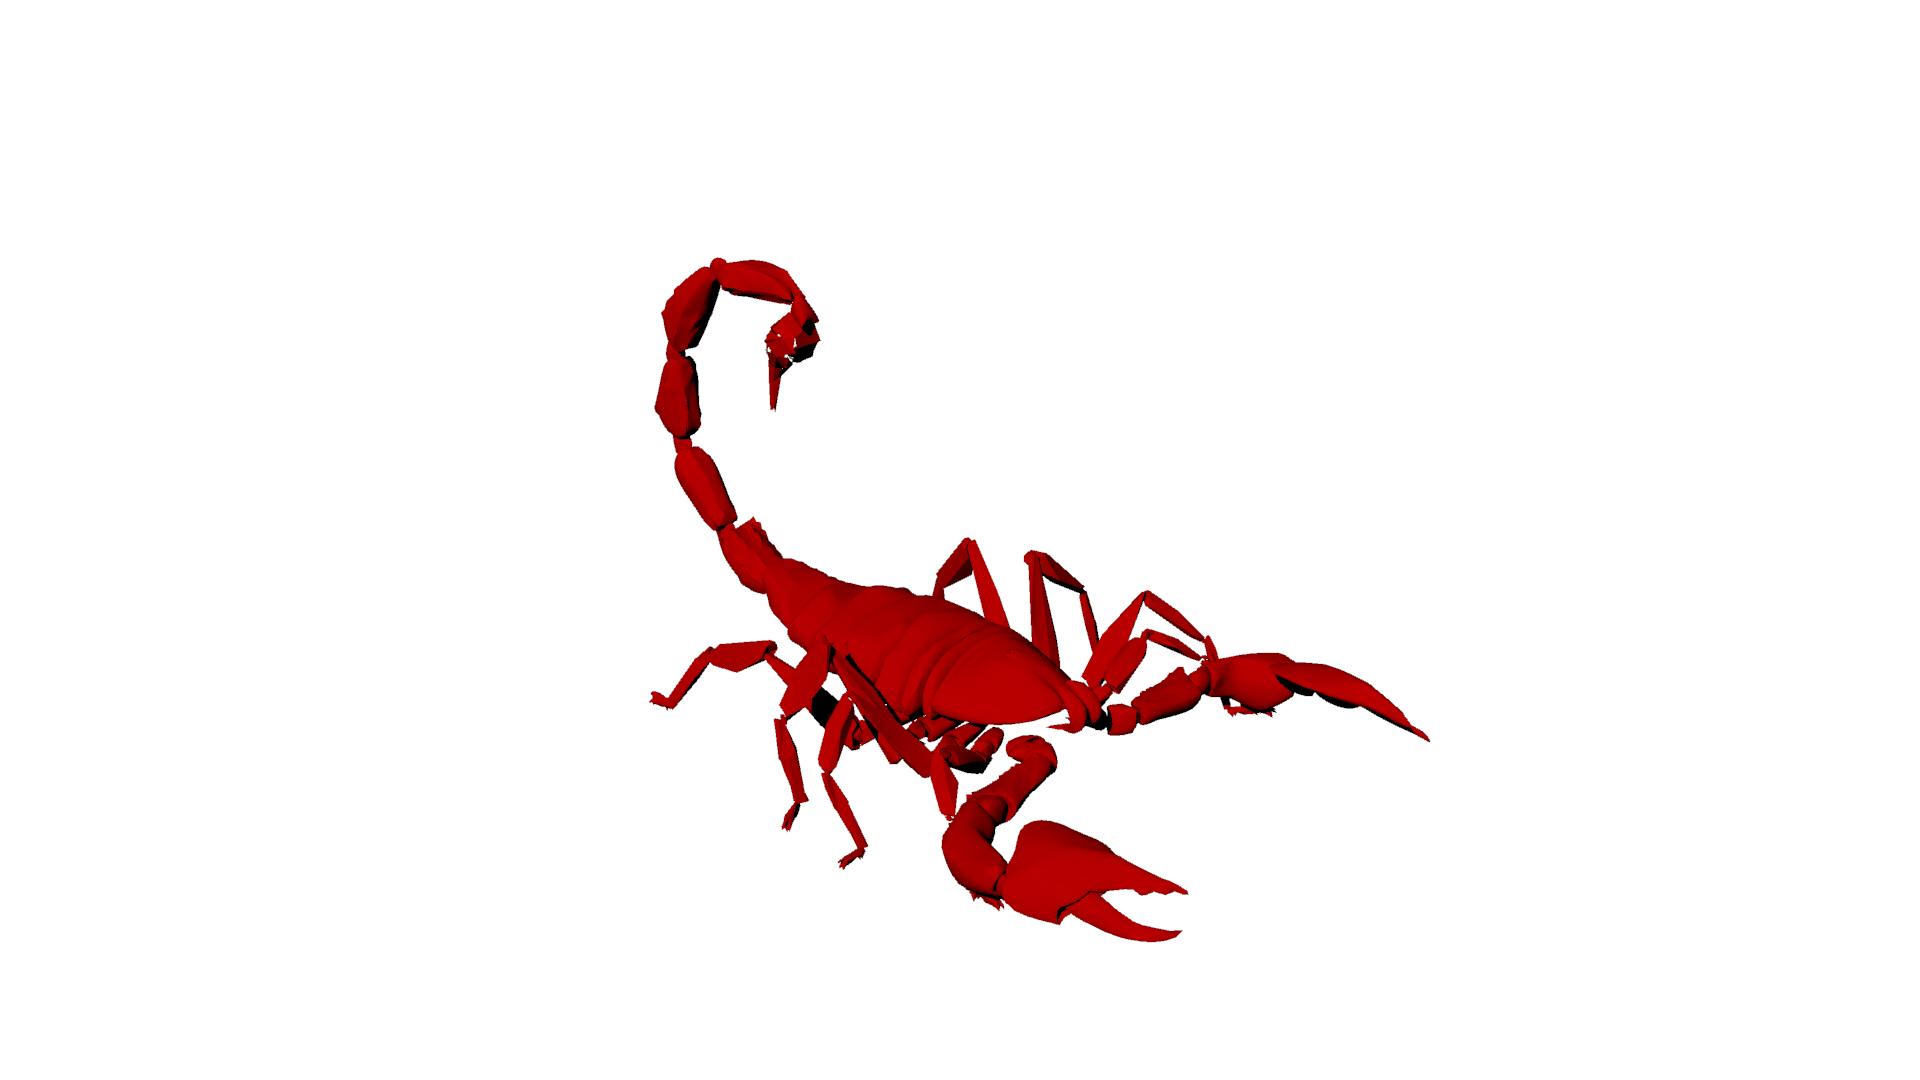 Red and White Scorpion Logo - Index of /images/more.....scorpion logo